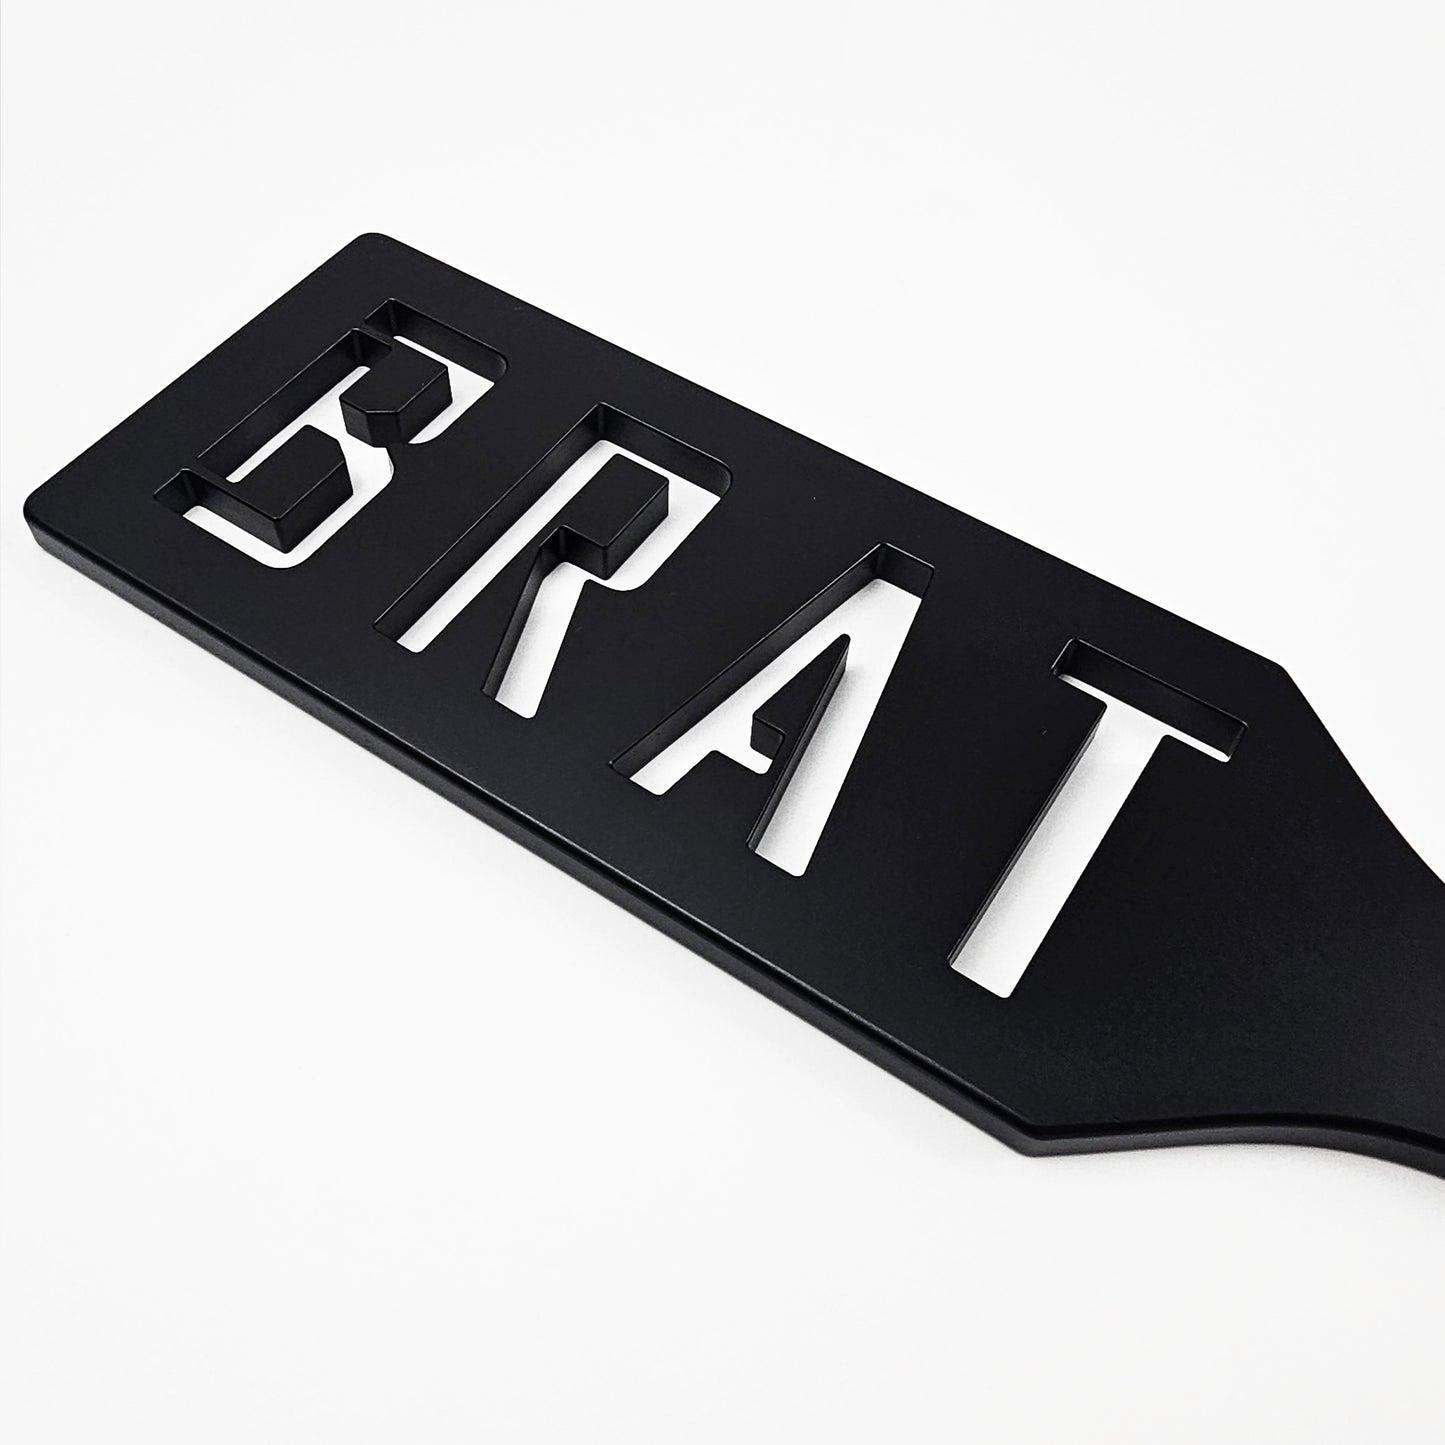 Black Steel Spanking Paddle with BRAT cut out made by Brat Breakers